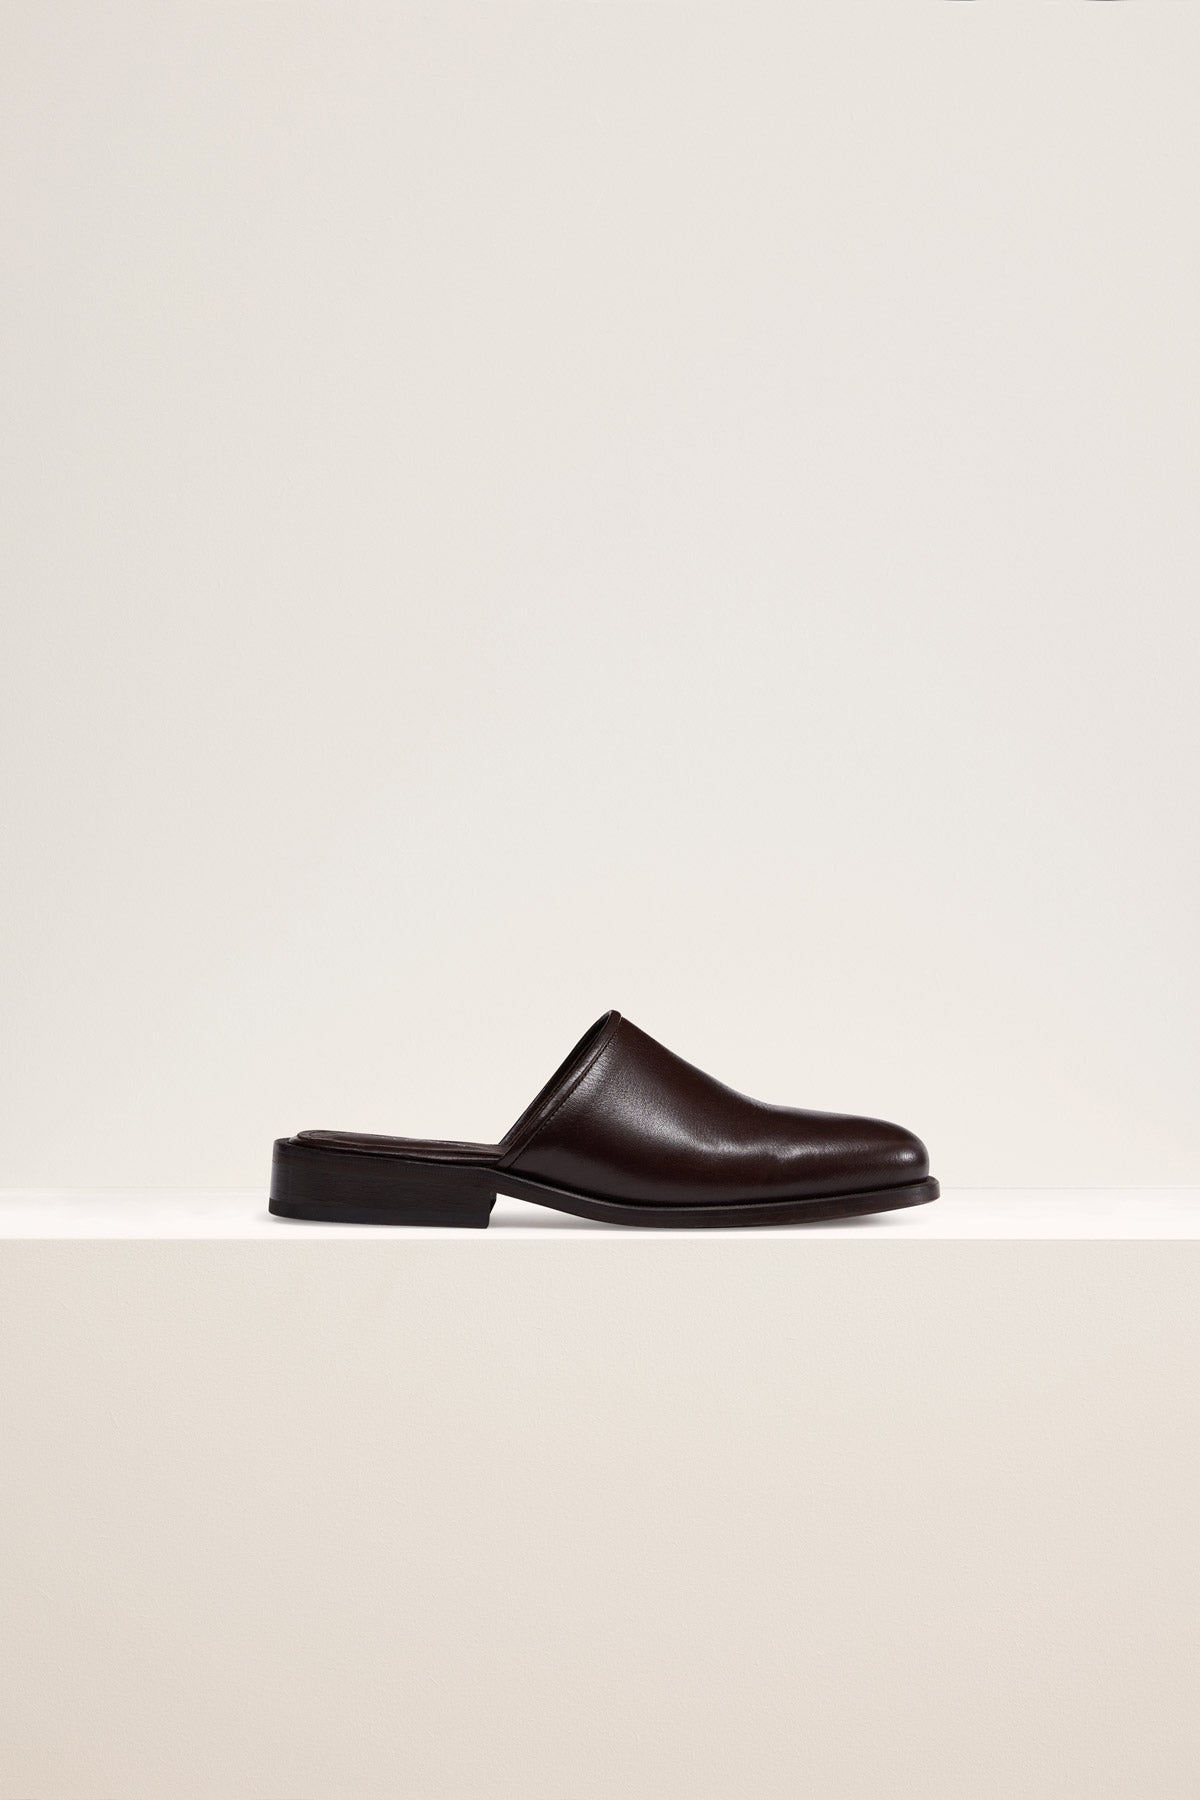 Lemaire  —  Square Mules